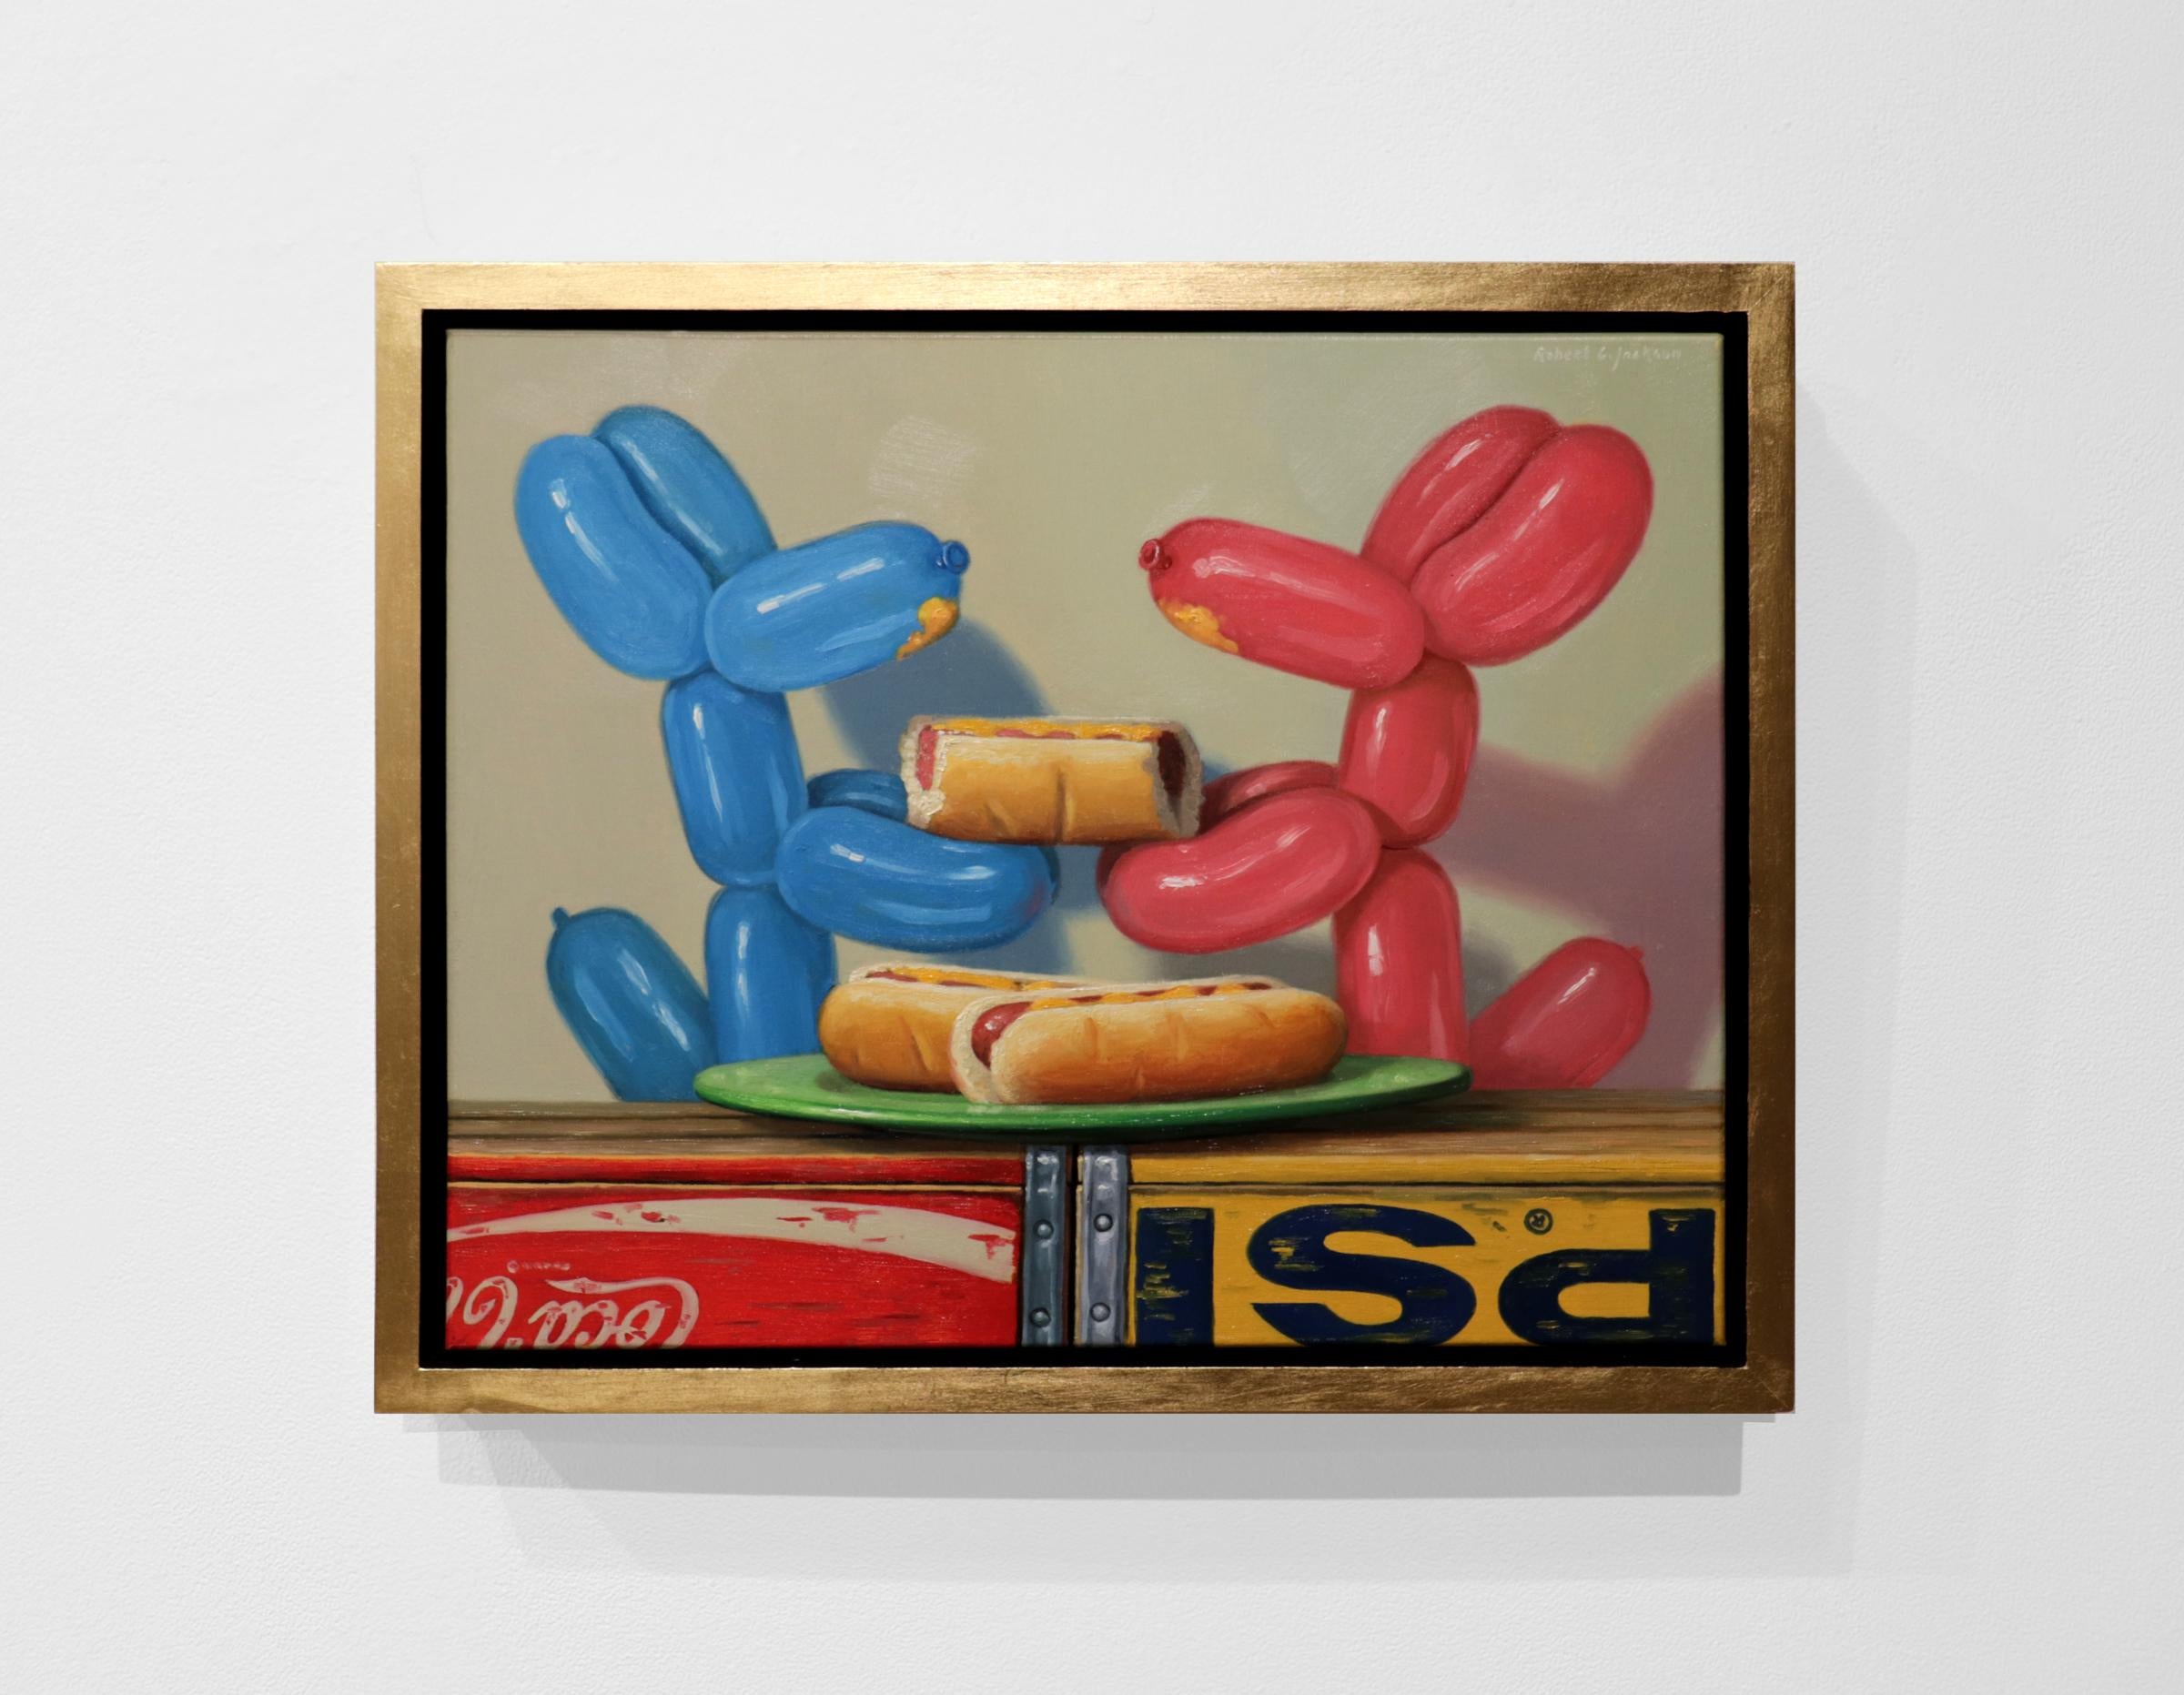 HOT DOGS, still life, balloon dogs, food, eating, playful, blue, pink - Painting by Robert Jackson